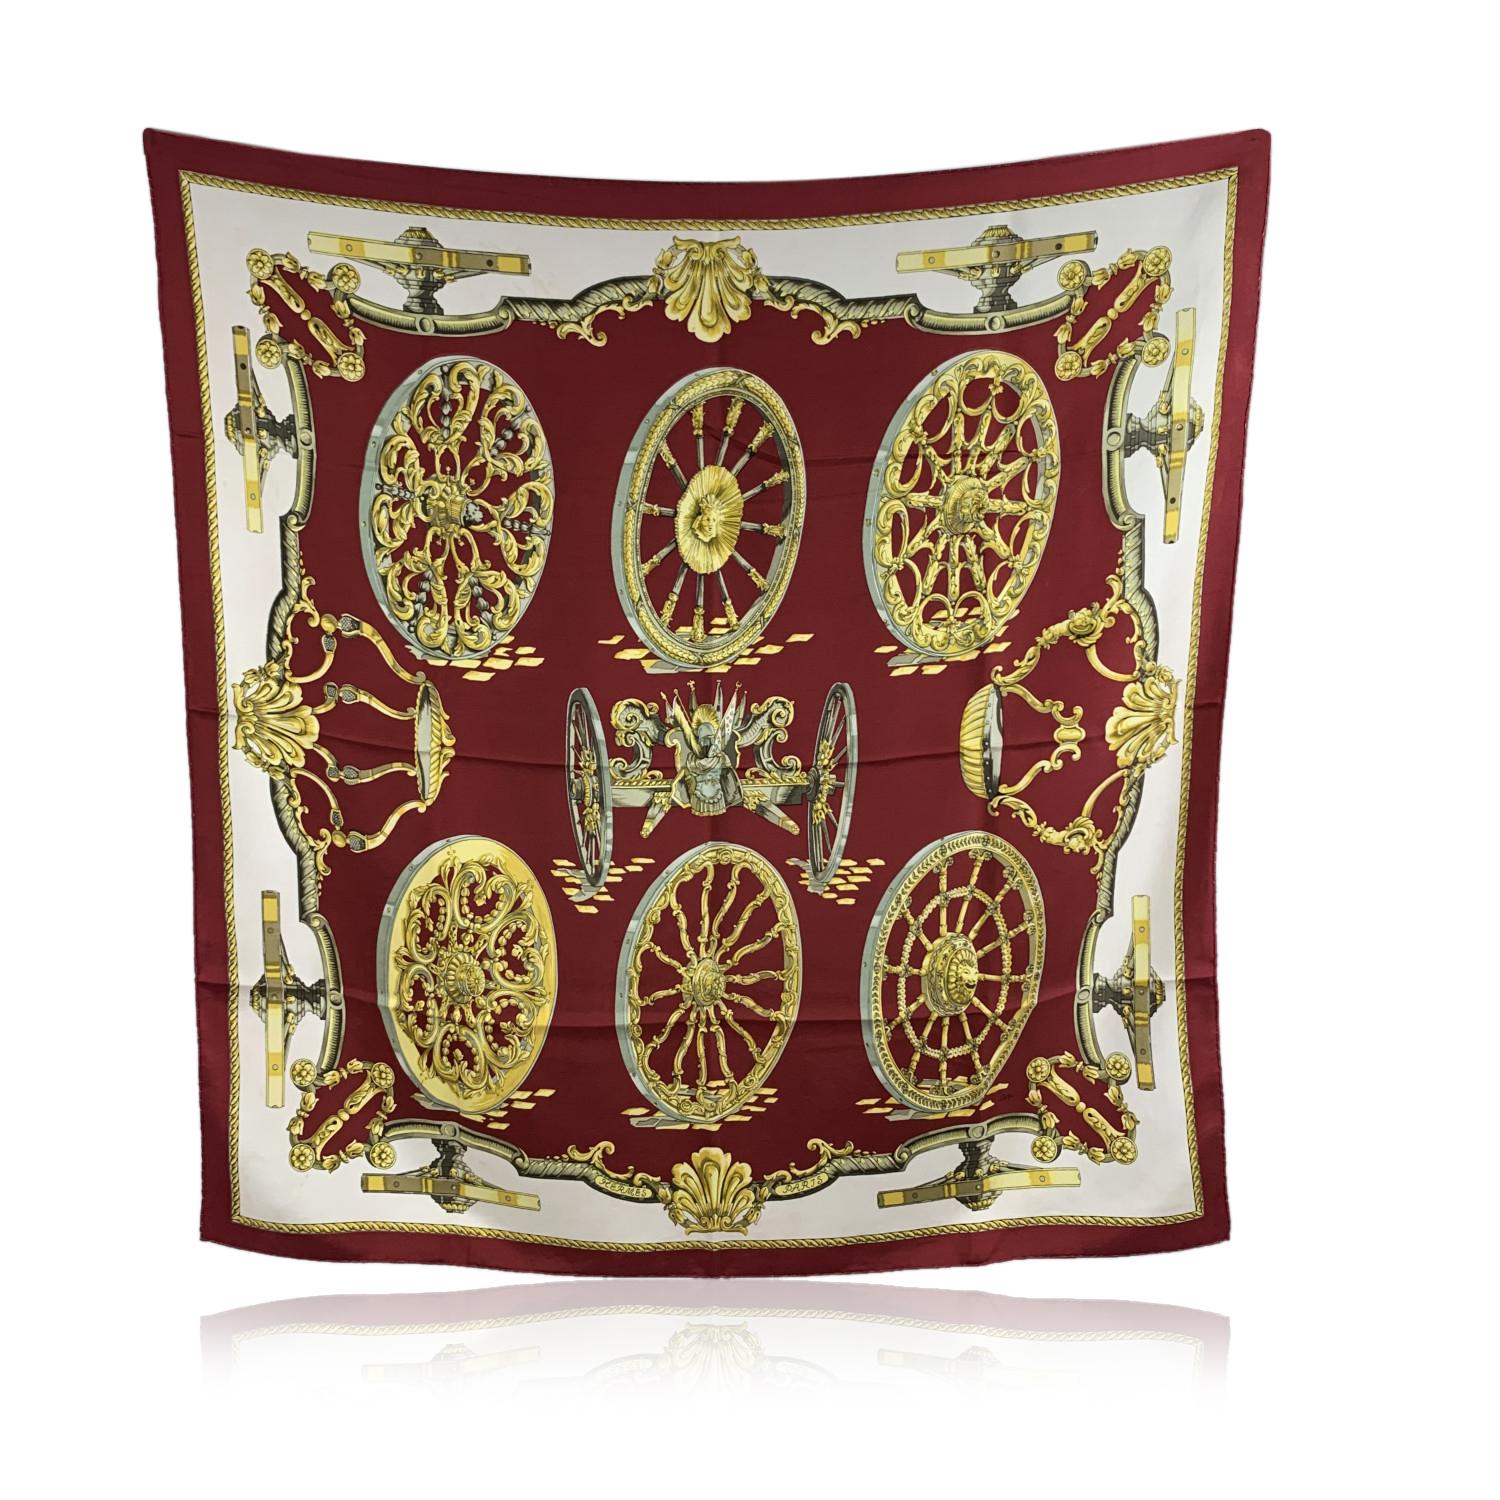 HERMES Silk scarf named 'Roues de Canon', created by artist Caty Latham, and first issued in 1967. It depicts different types of cannon wheels. Main colors are burgundy, white, and yellow. 100% Silk. Hand rolled edges. Approx measurements: 35 x 35